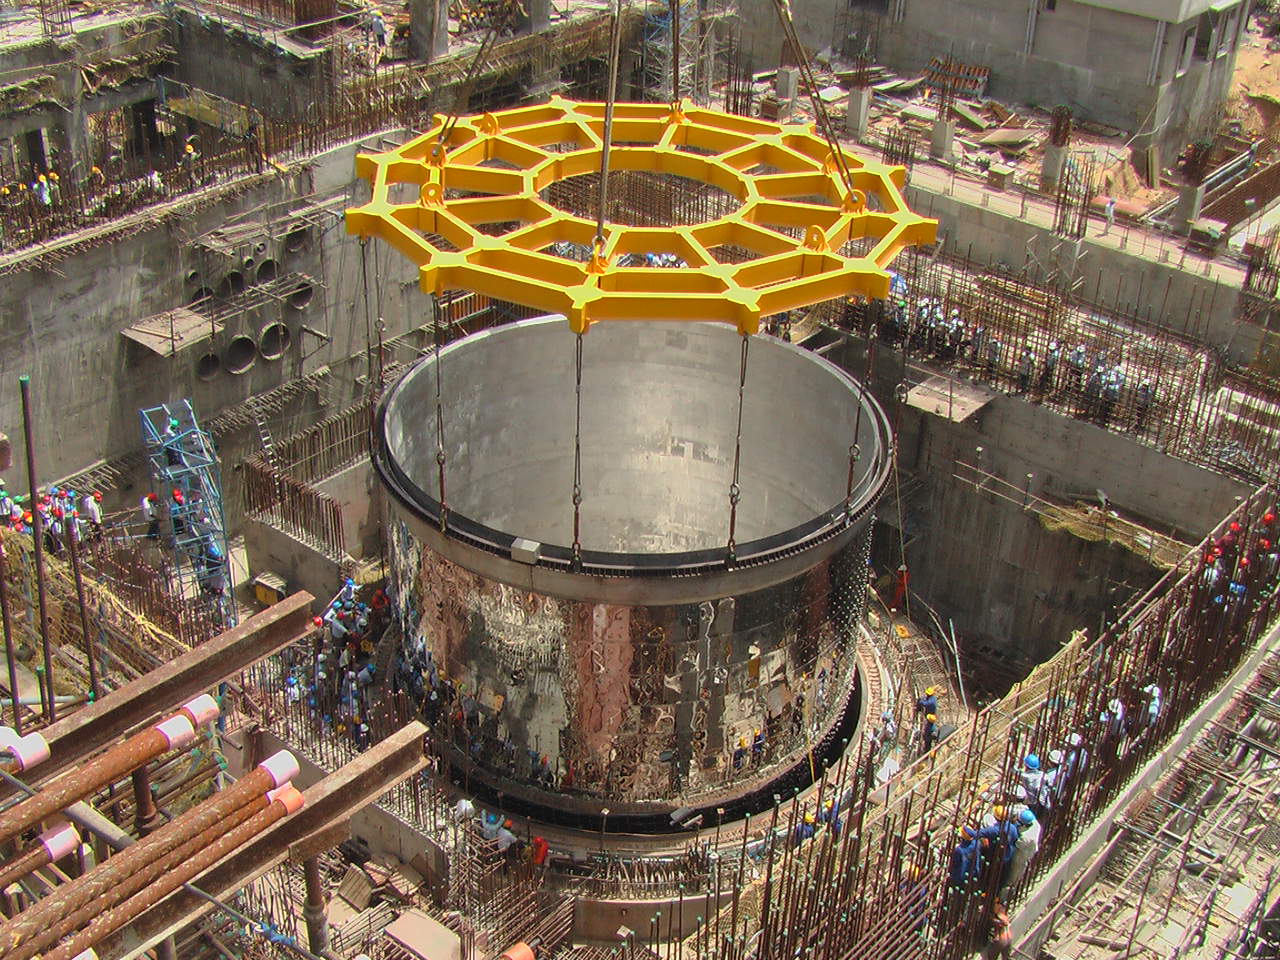 Main vessel for India's fast breeder reactor to be built in two weeks